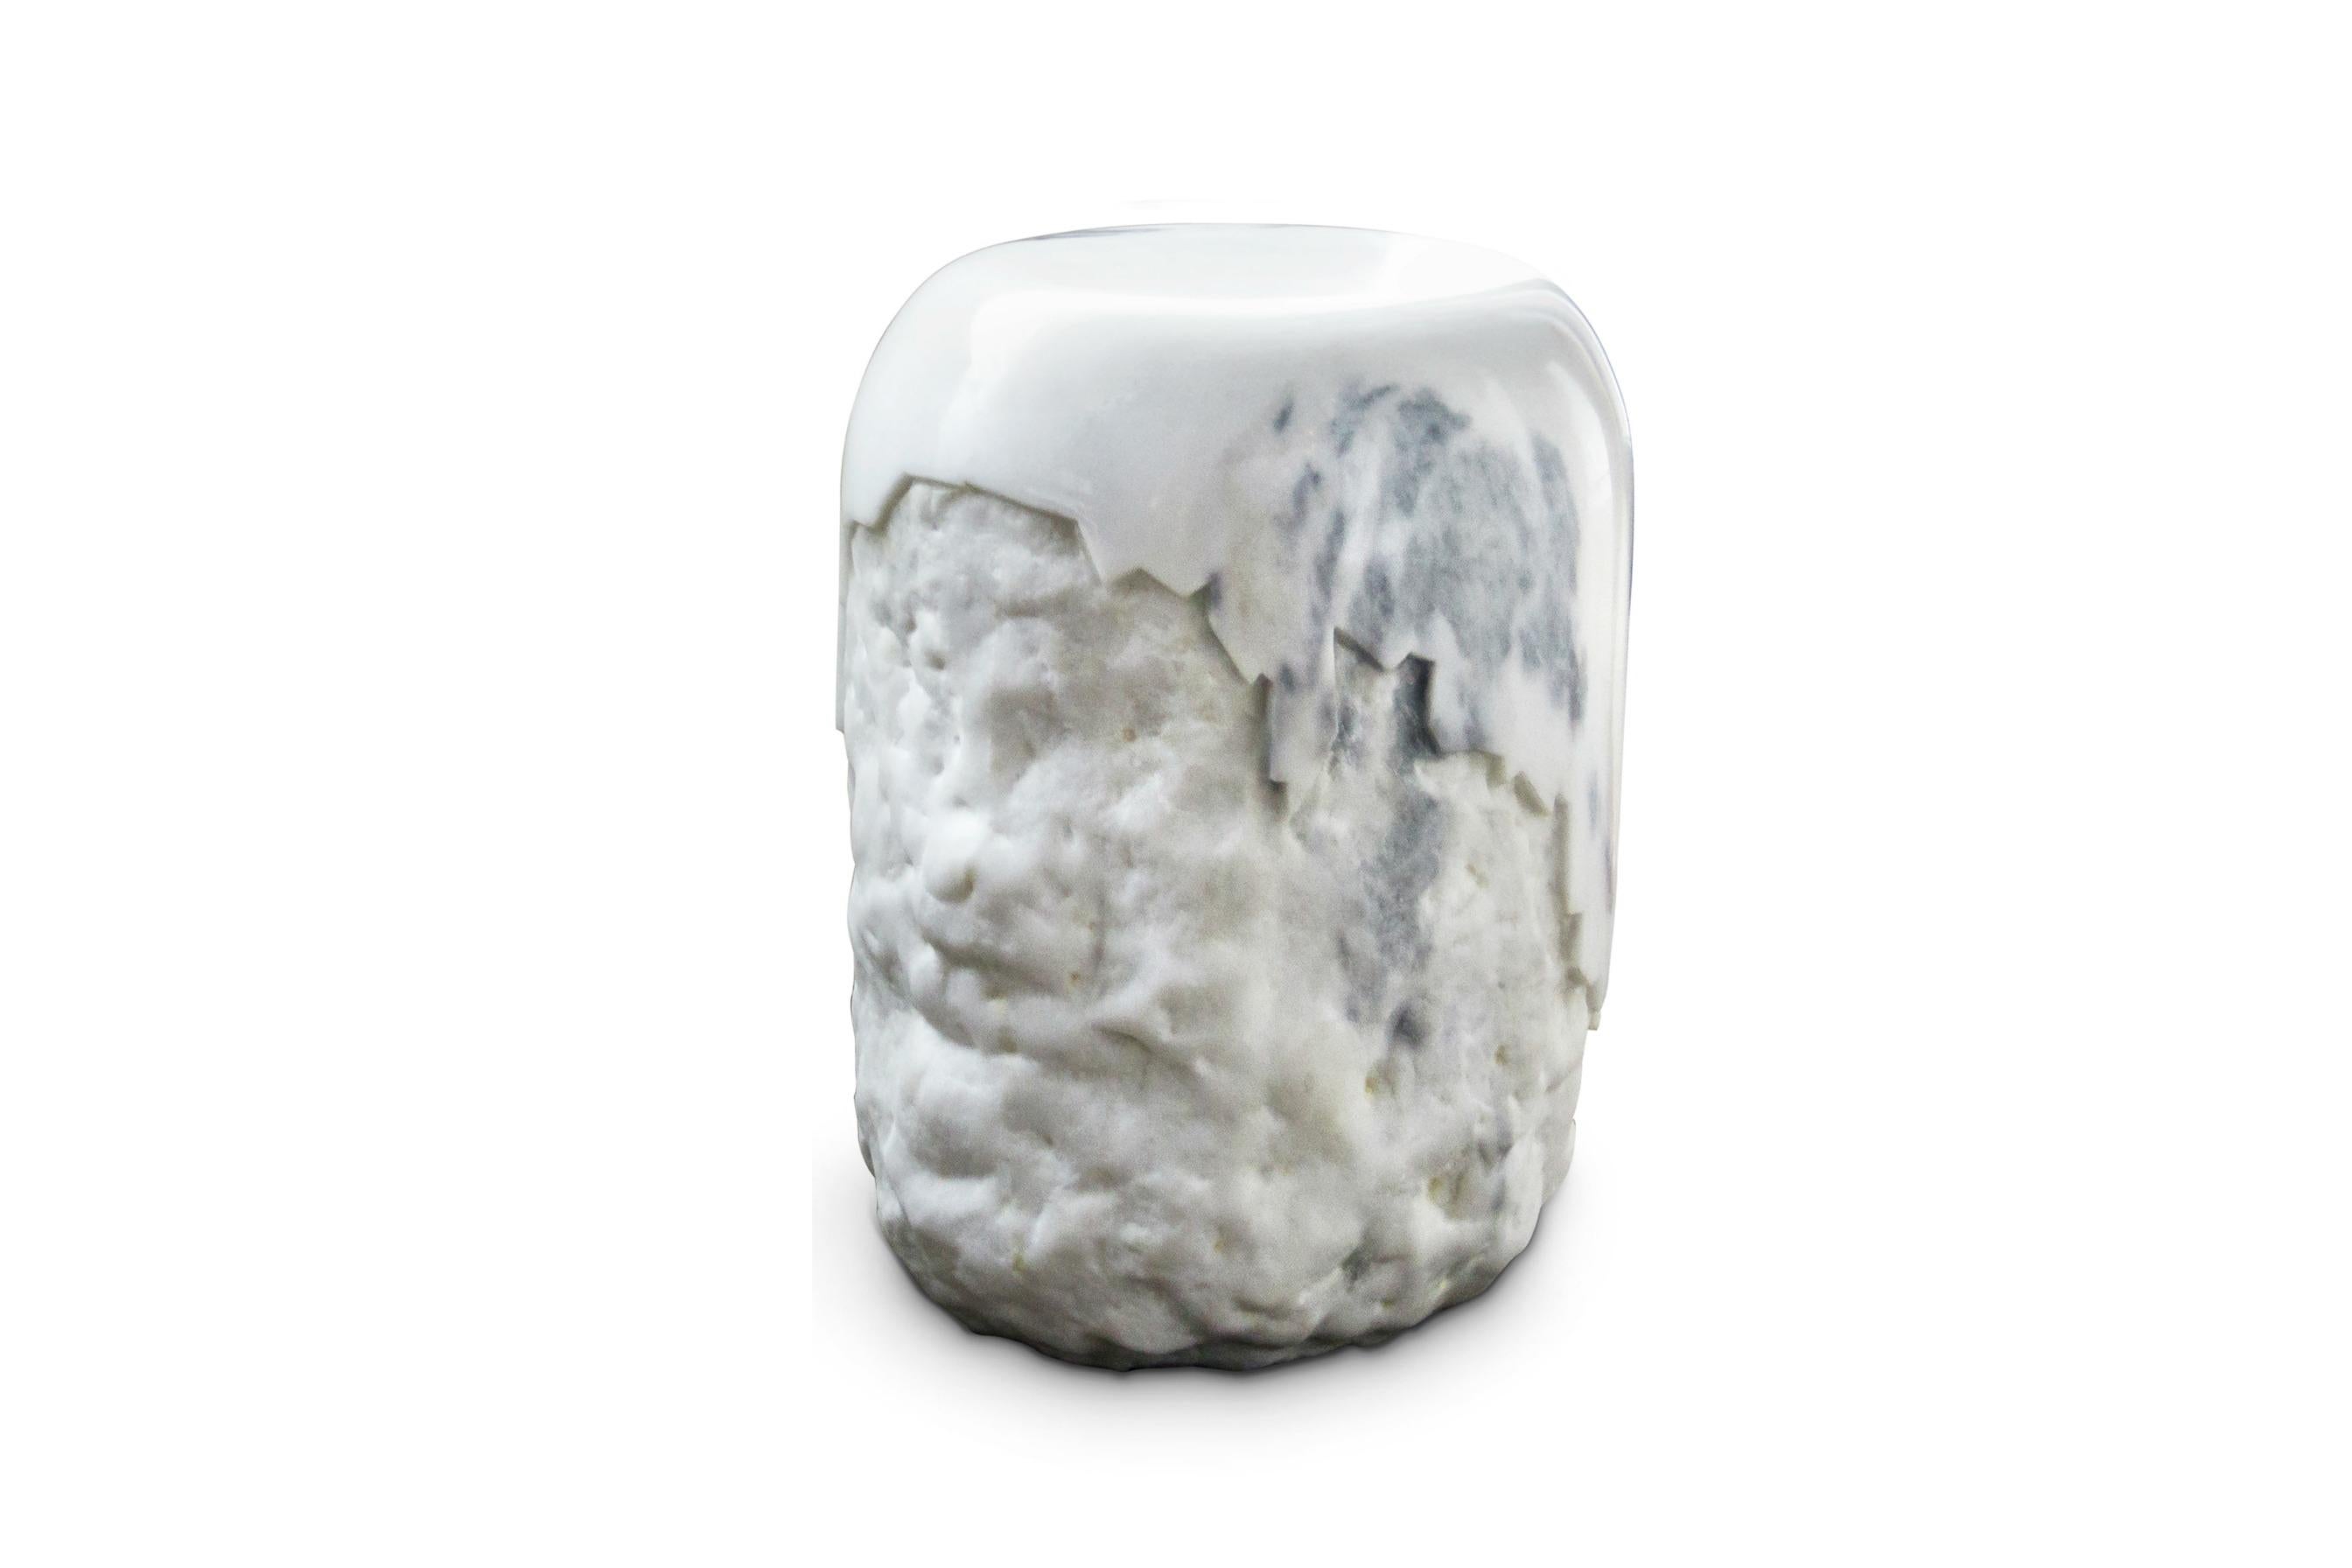 Yoho National Park is known for its expansive glaciers and impressive waterfalls. Made of Carrara marble, Yoho stool is a tribute to this natural beauty. Place it in a modern interior design and this contemporary stool will complement it, adding an